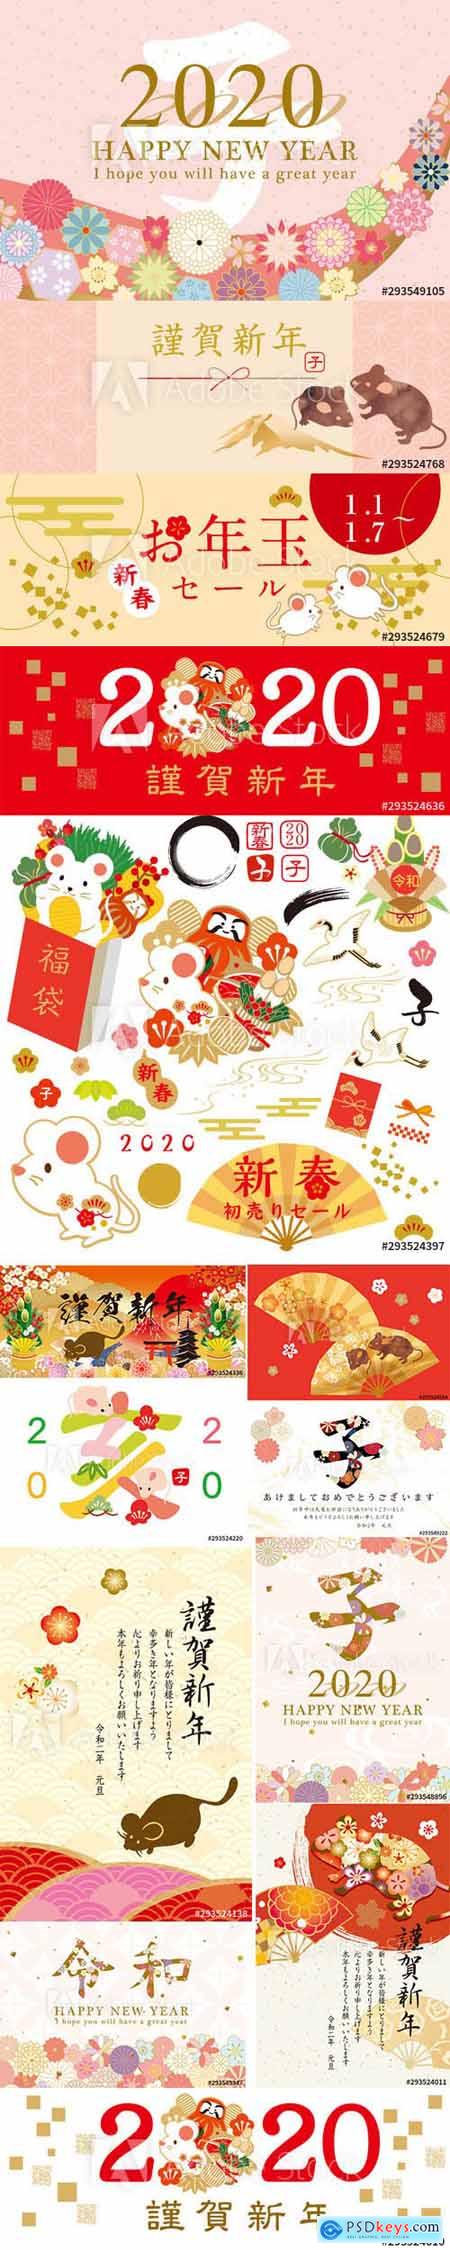 Set of Chinese New Year 2020 Web Banner and Illustration vol2